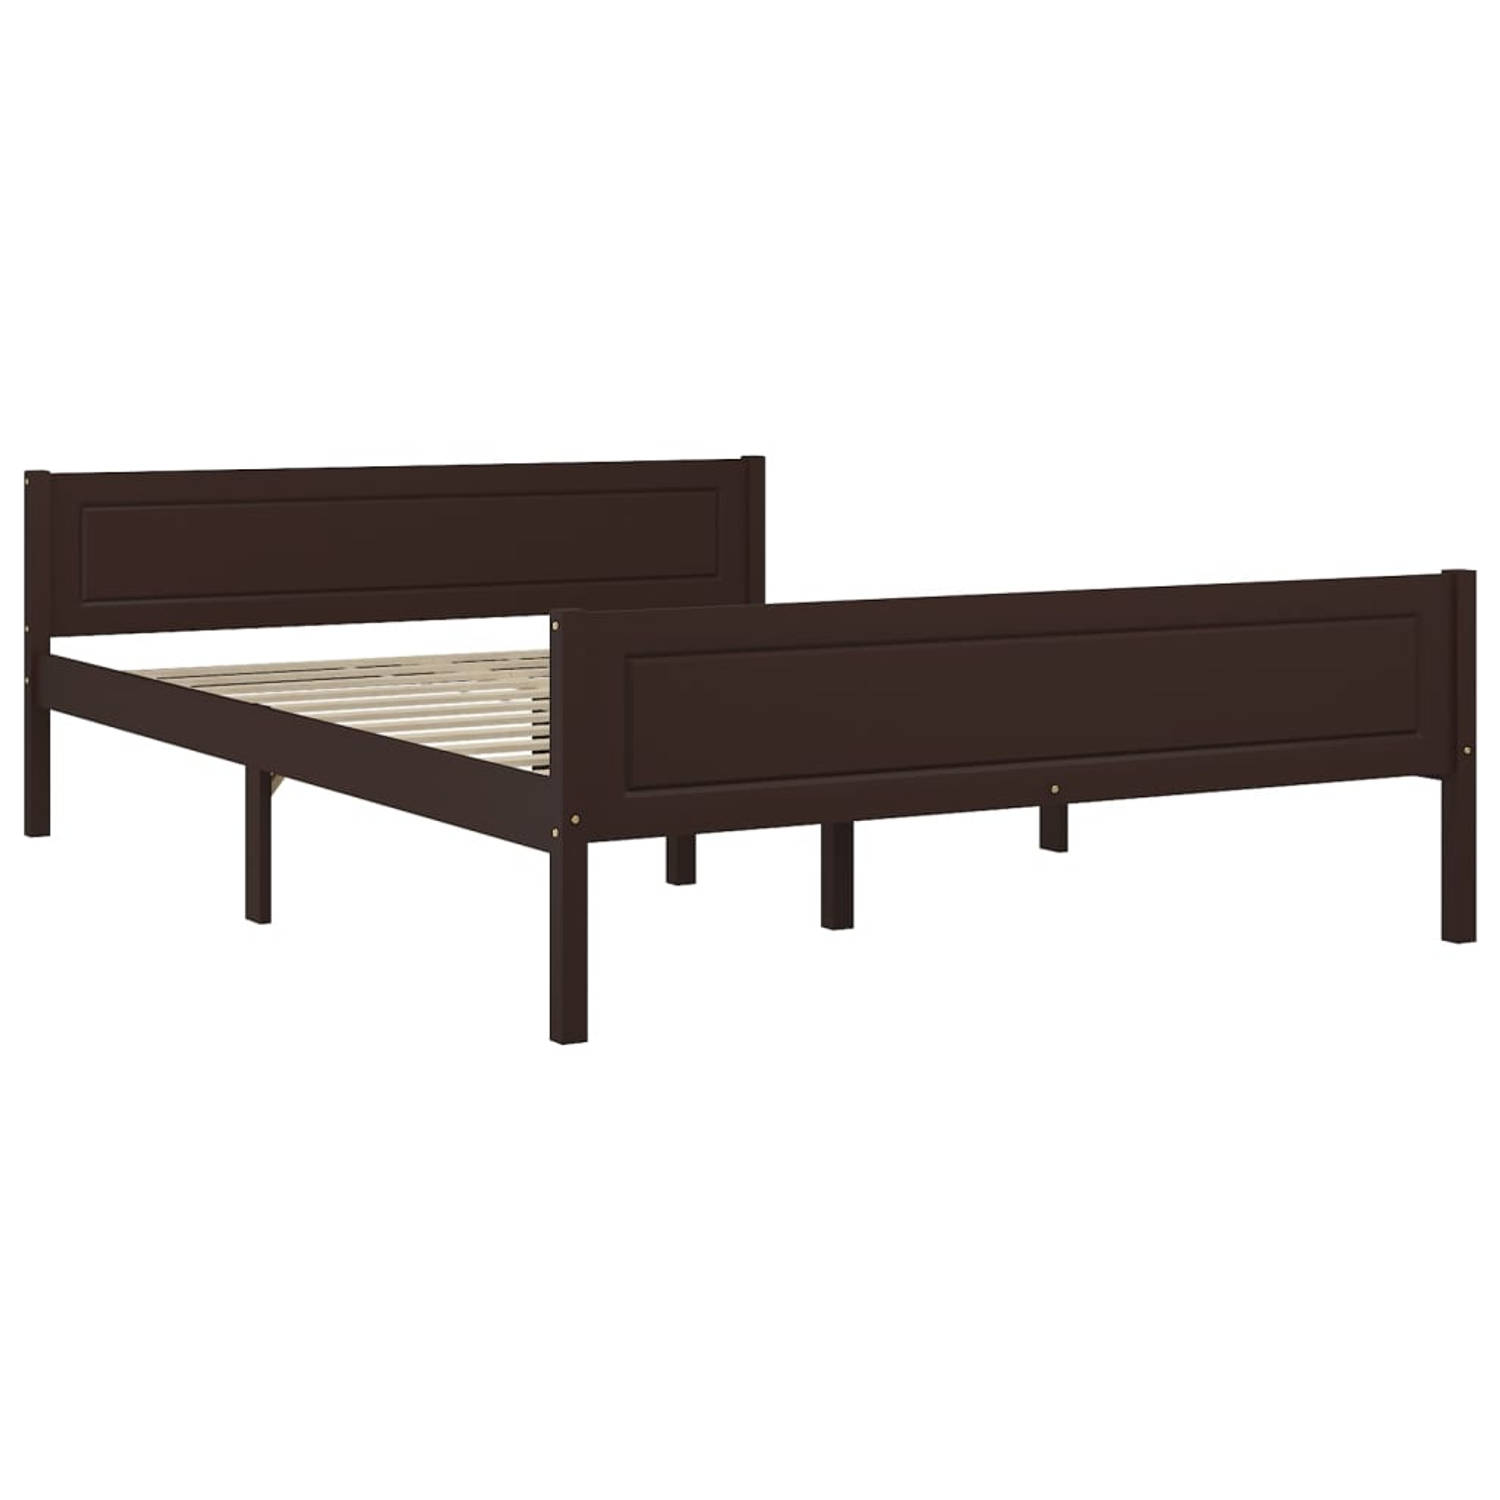 The Living Store Bedframe massief grenenhout donkerbruin 160x200 cm - Bedframe - Bedframe - Bed Frame - Bed Frames - Bed - Bedden - 2-persoonsbed - 2-persoonsbedden - Tweepersoons